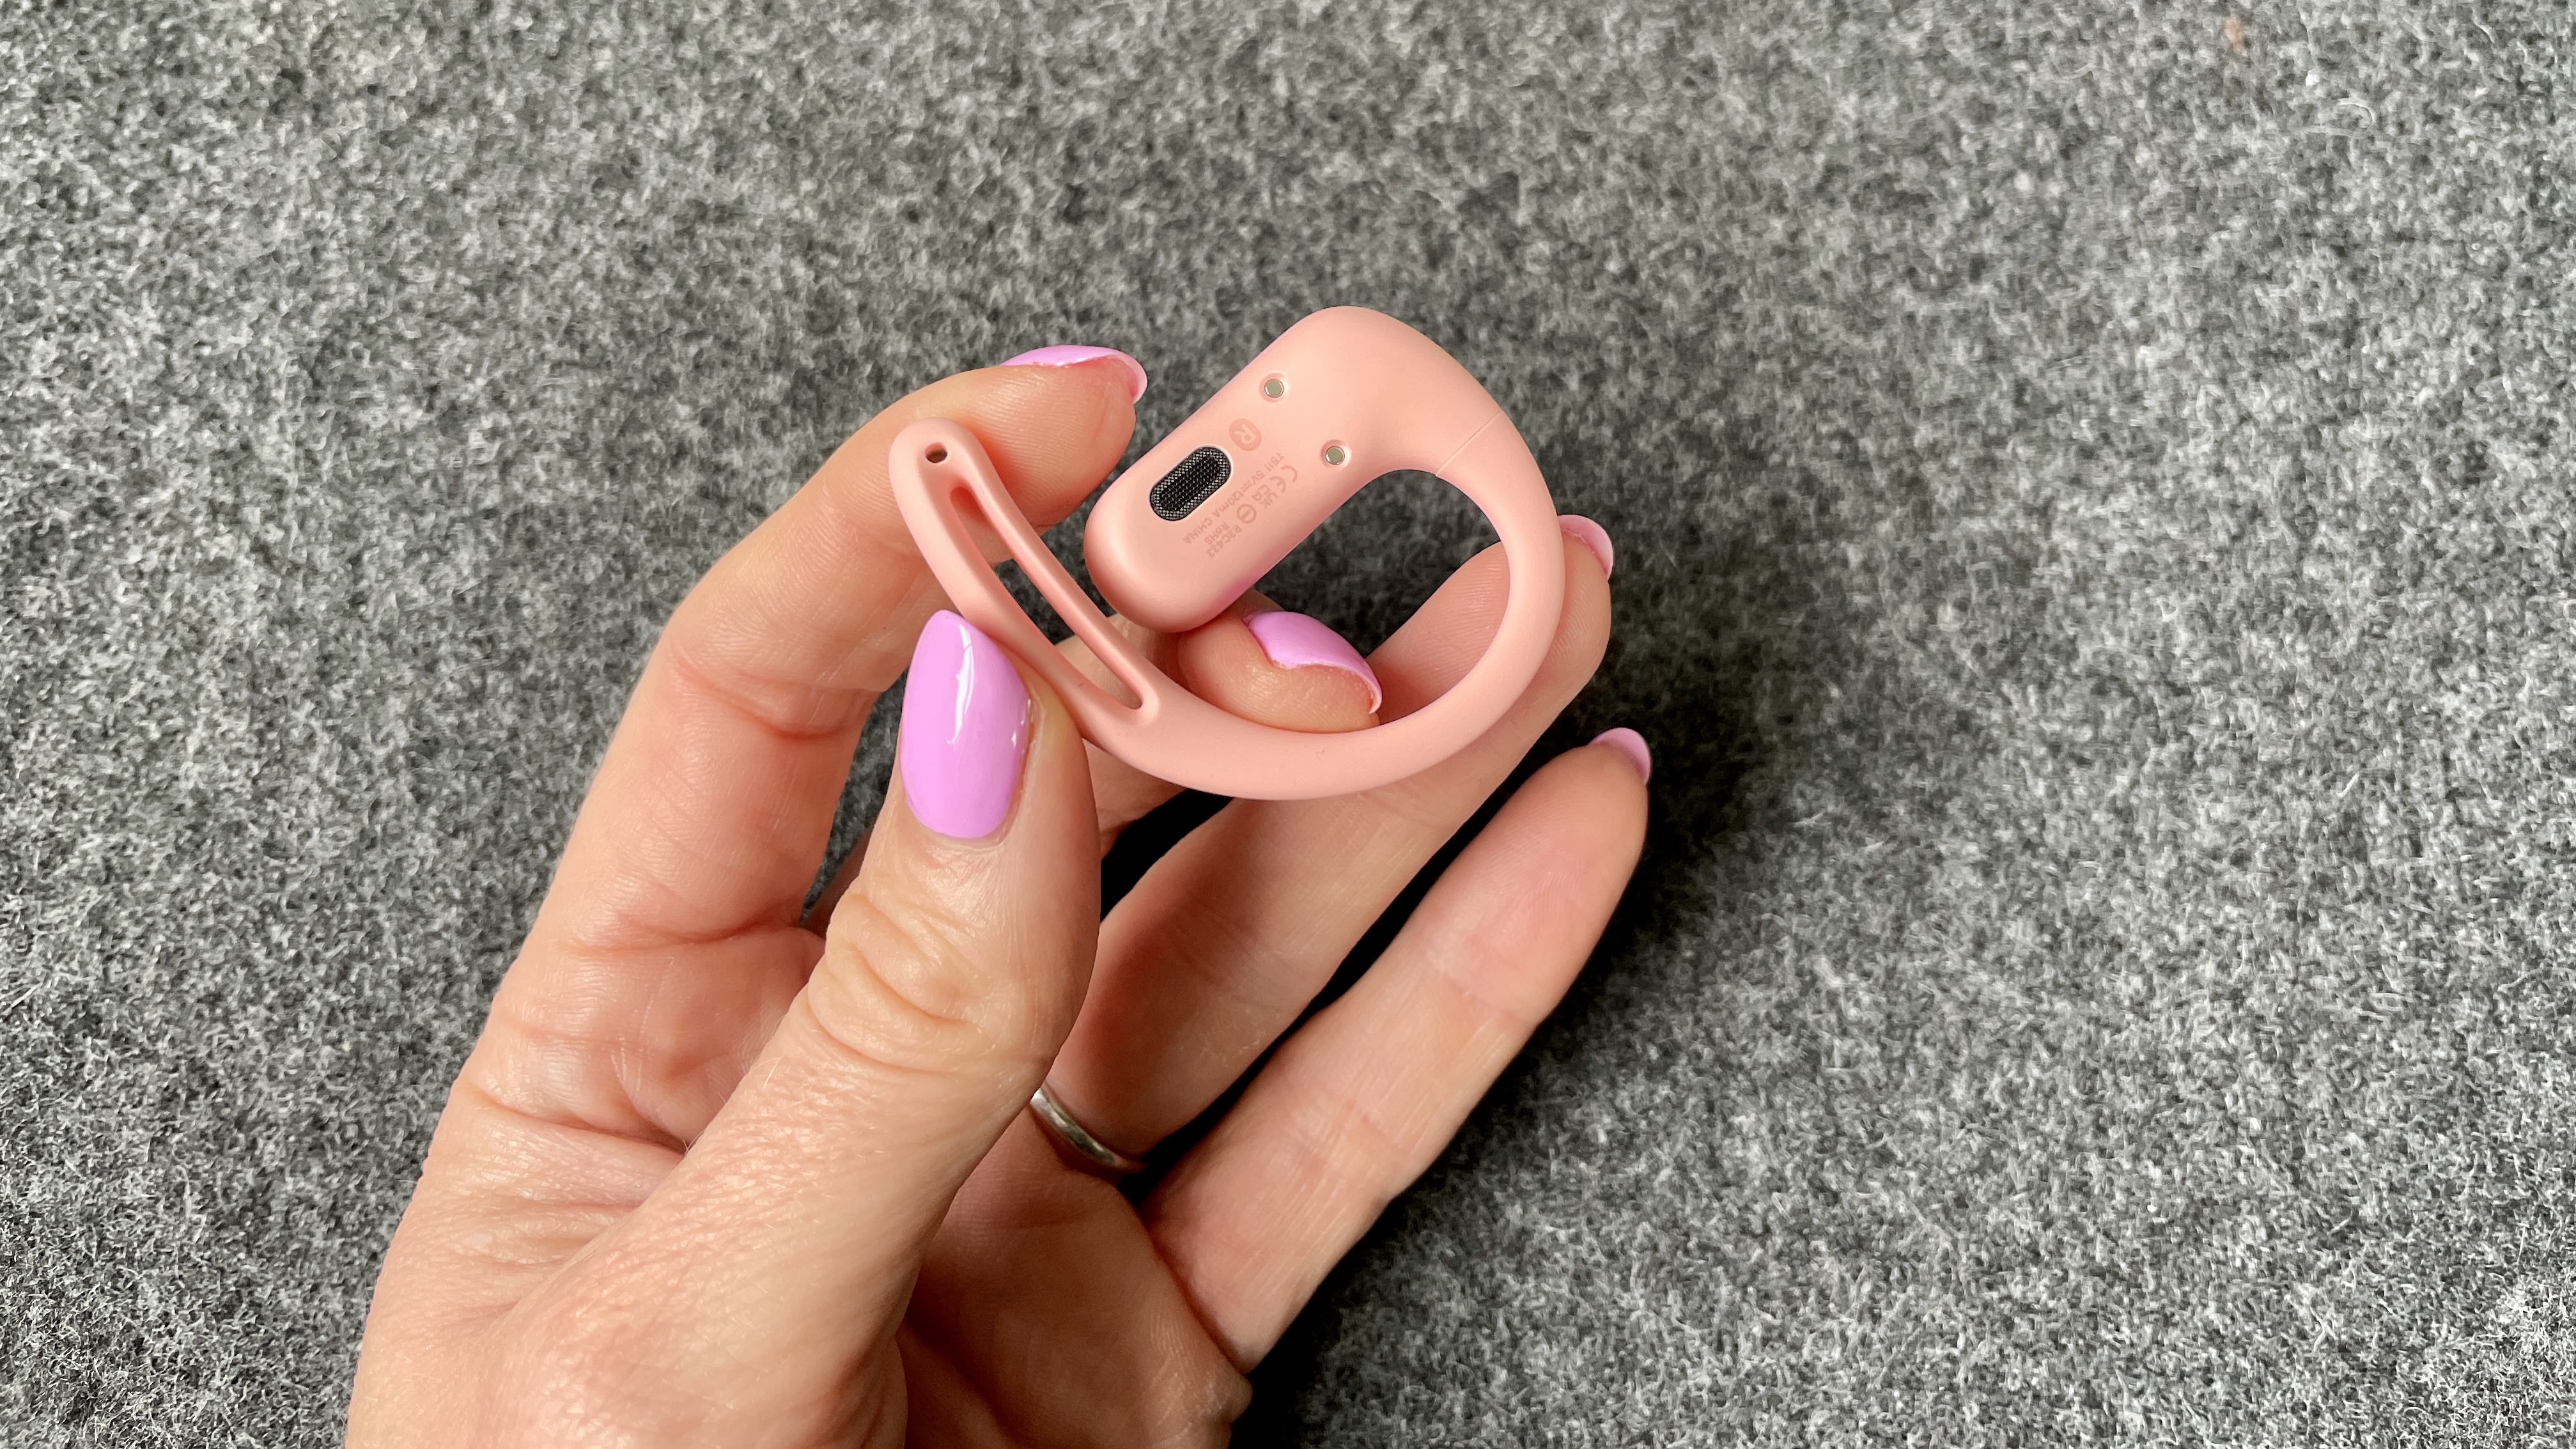 Shokz OpenFit Air in pink, held in a hand wearing pink nail varnish